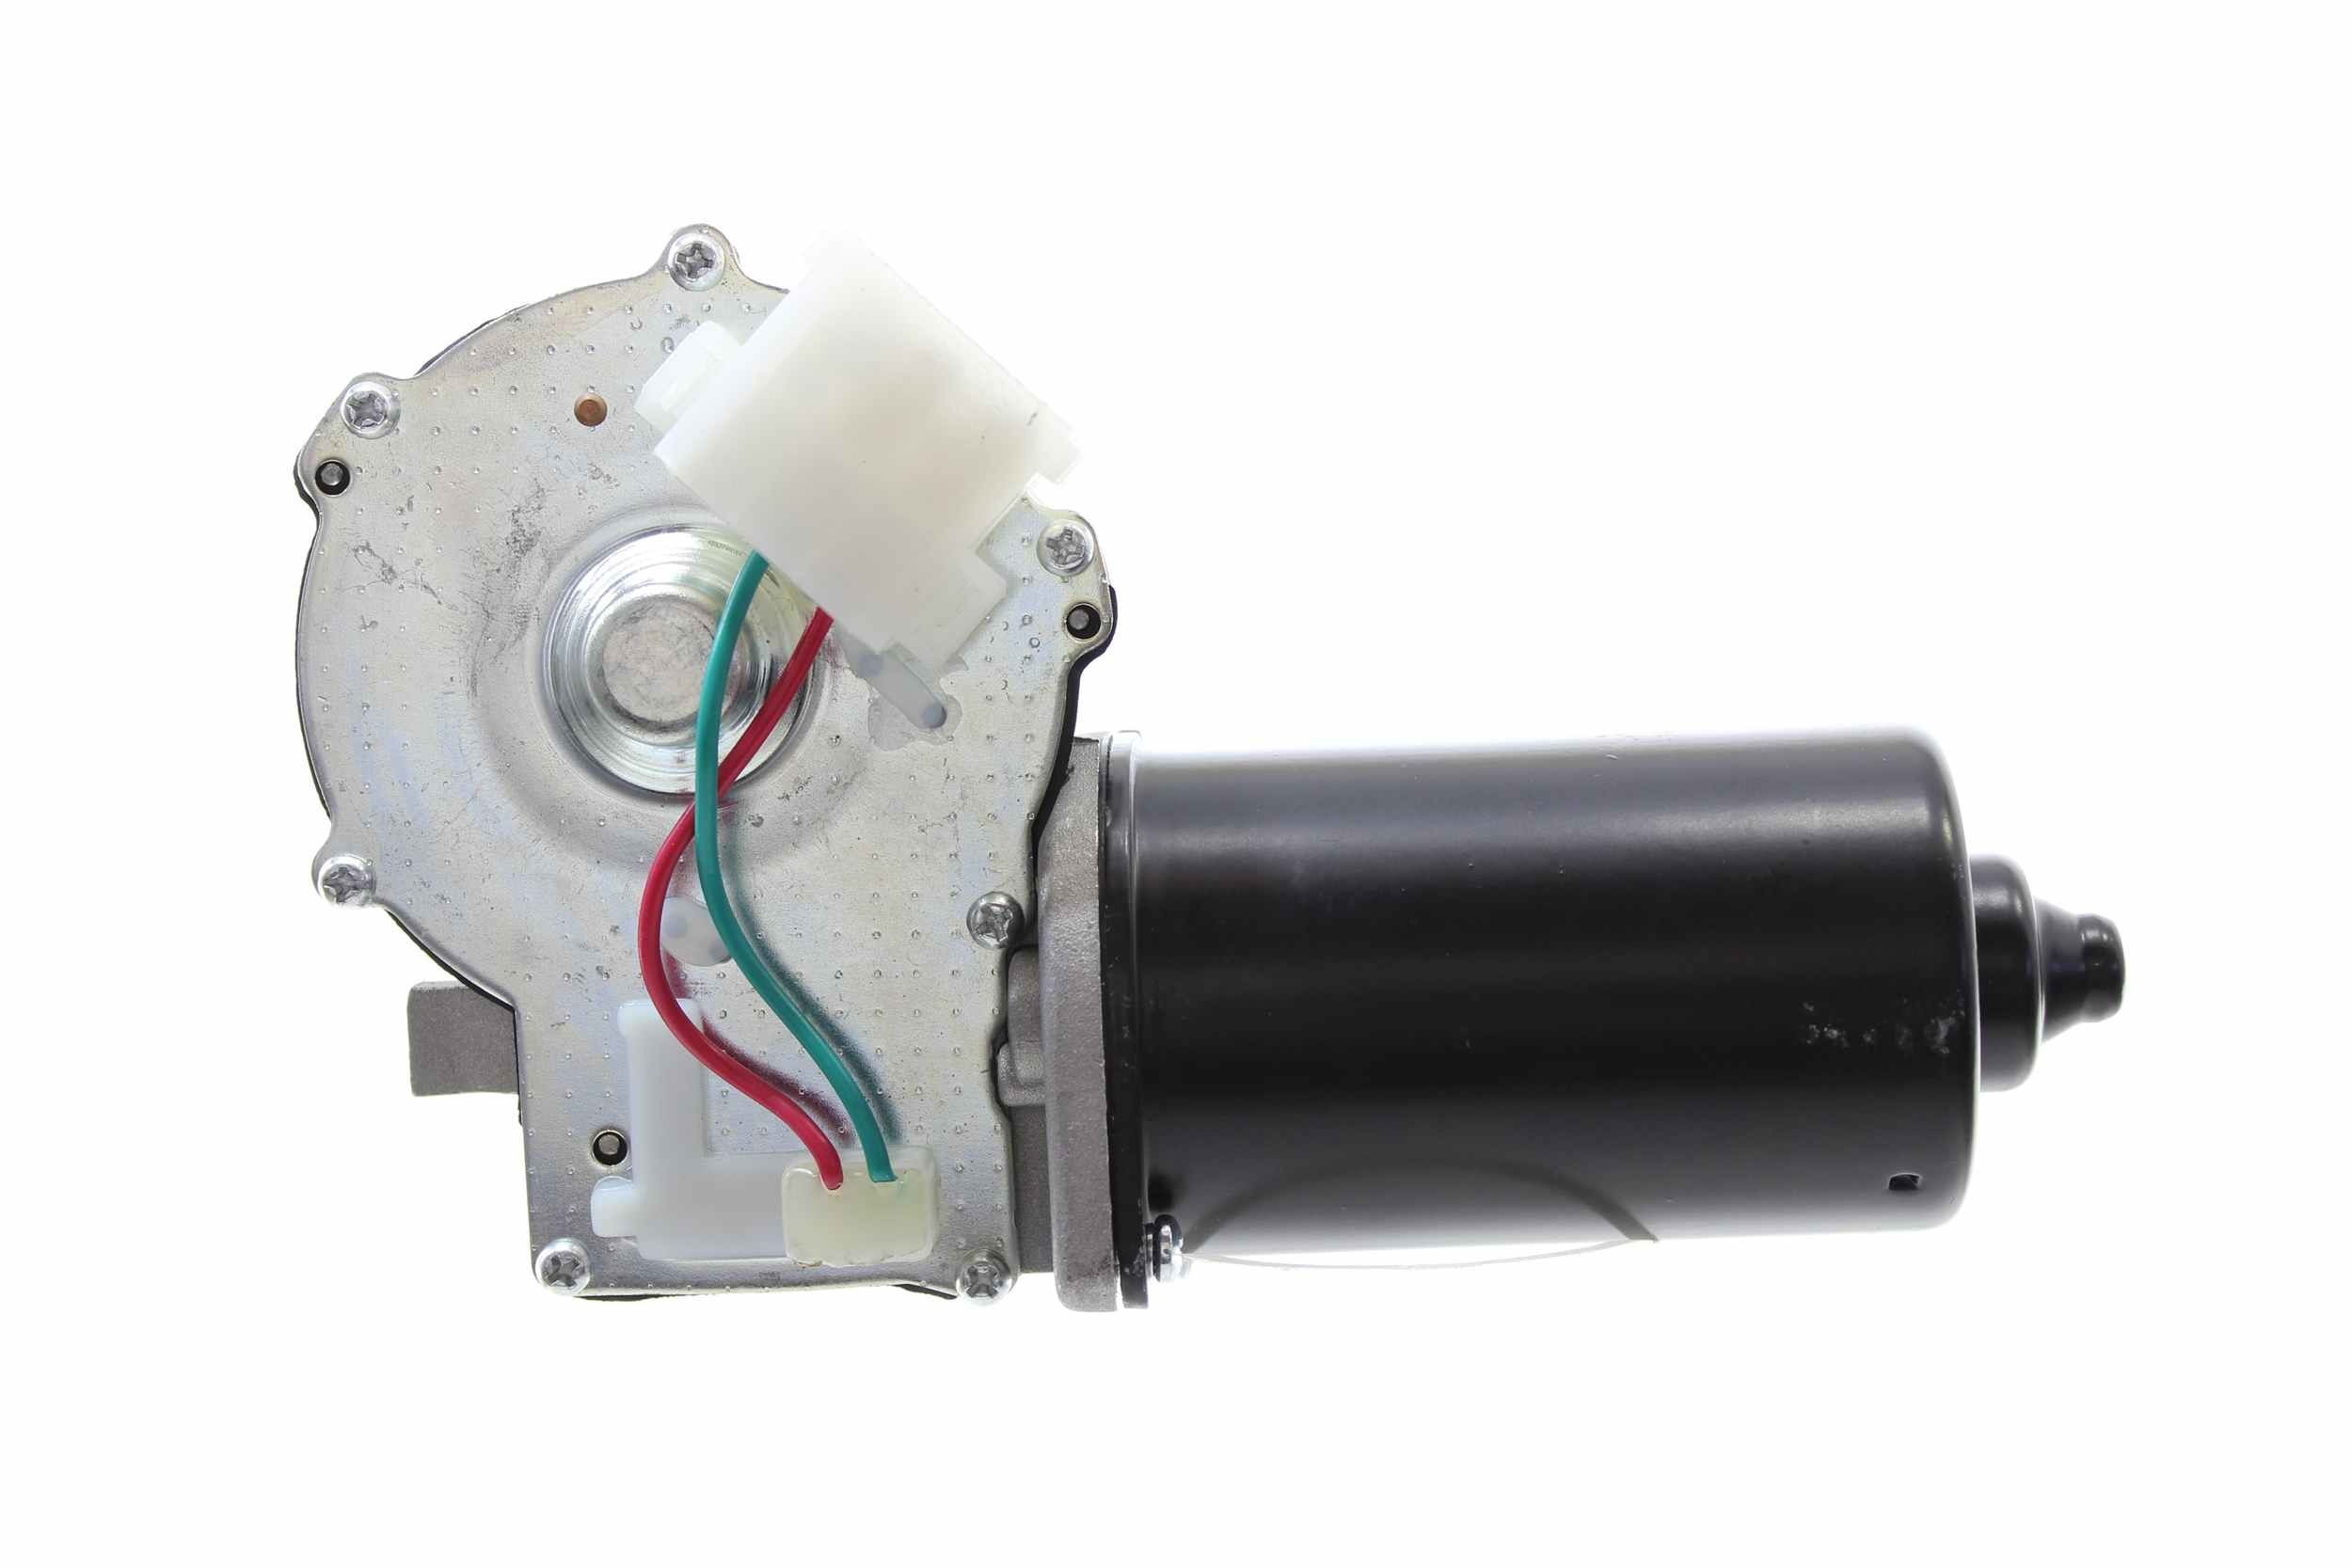 ALANKO 10800918 Wiper motors 24V, Front, for left-hand/right-hand drive vehicles